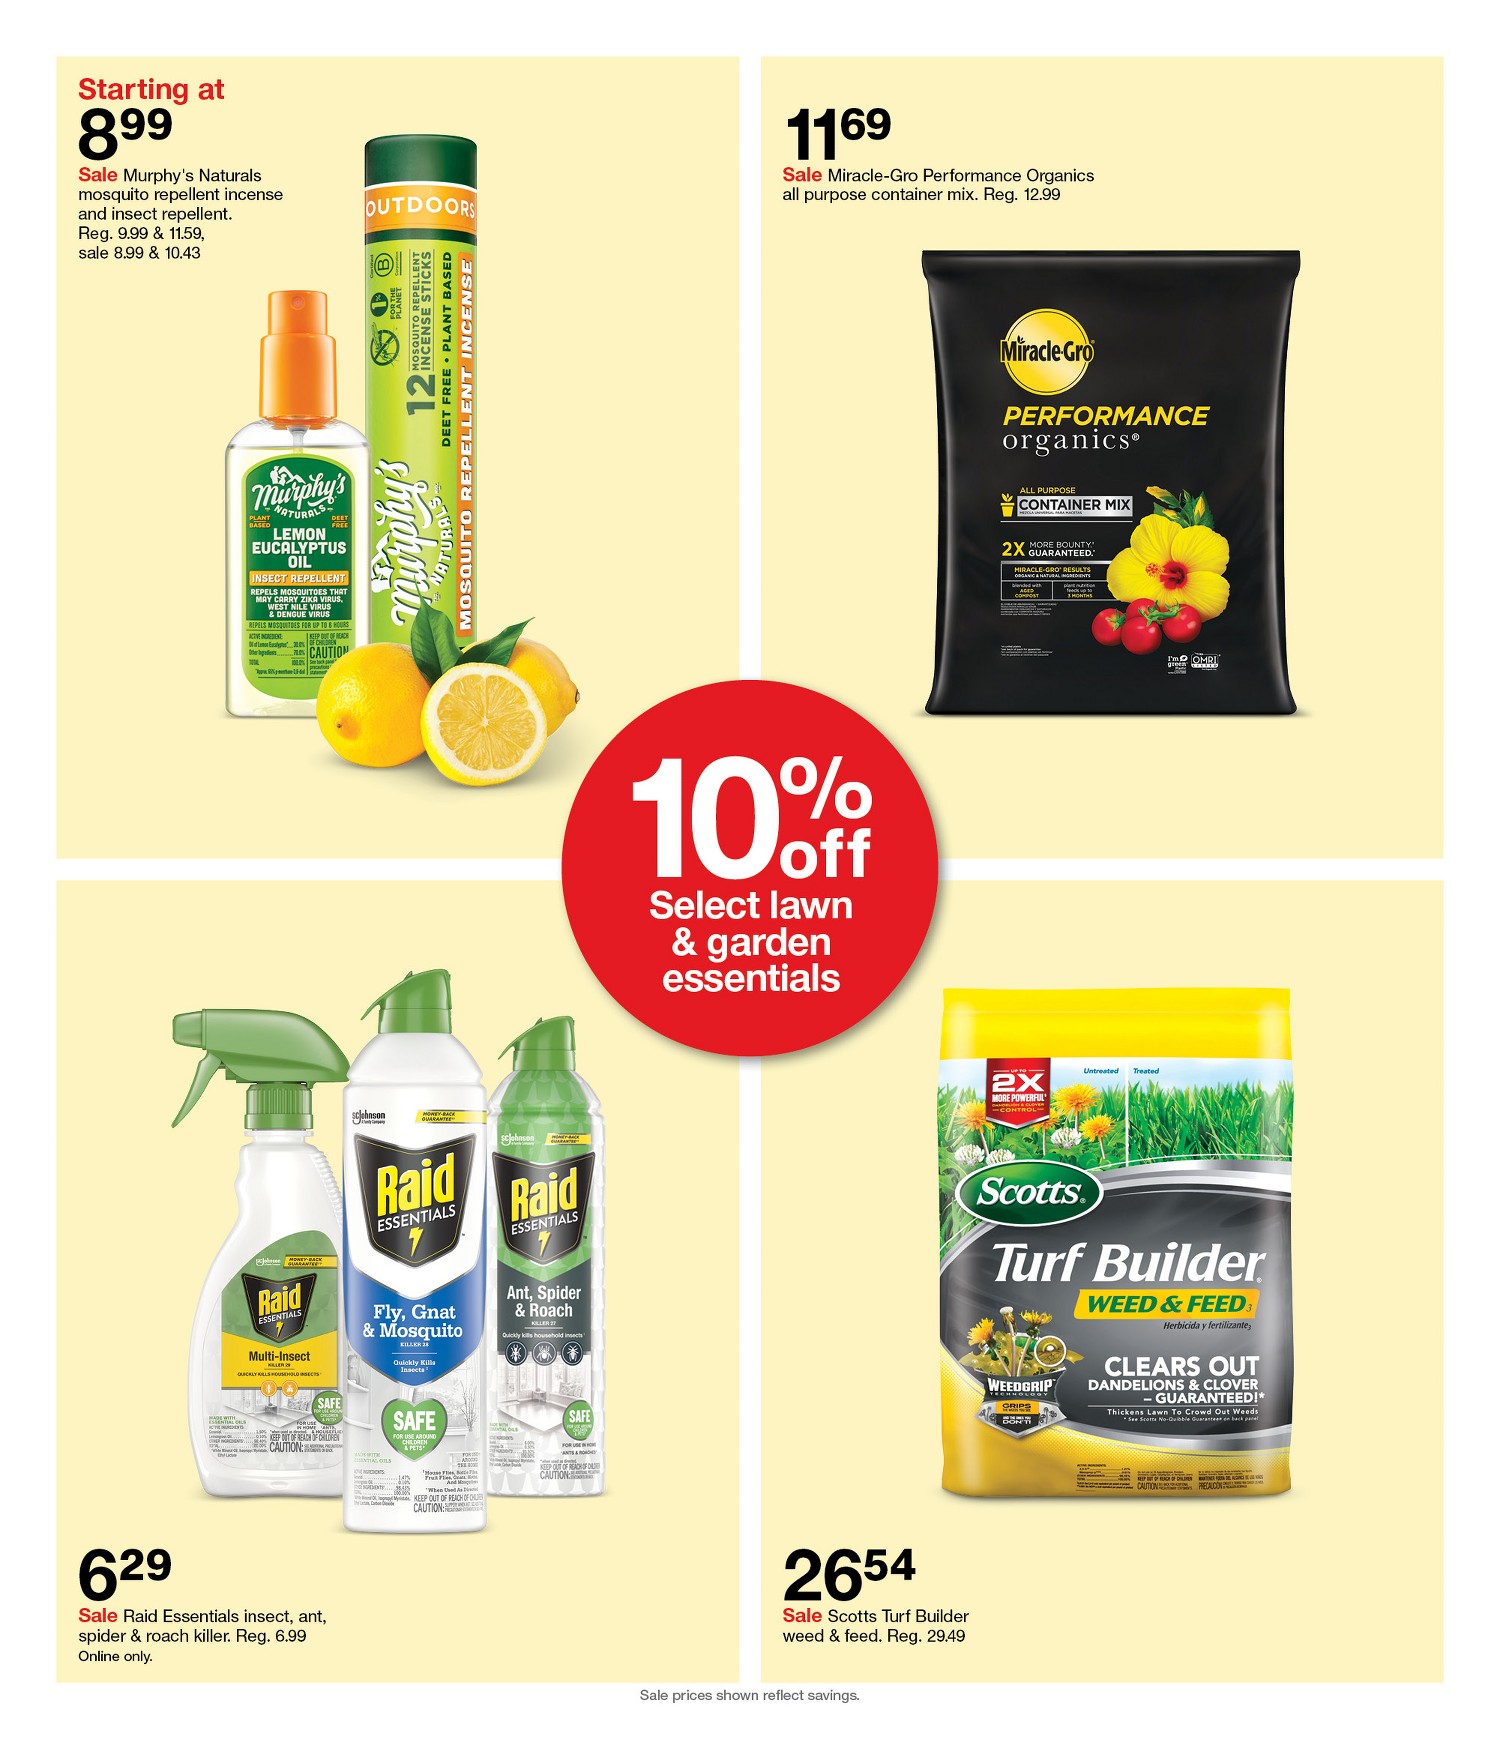 Target Weekly Ad Preview 5/15 thru 5/21 - Get a Peek of the next Ad